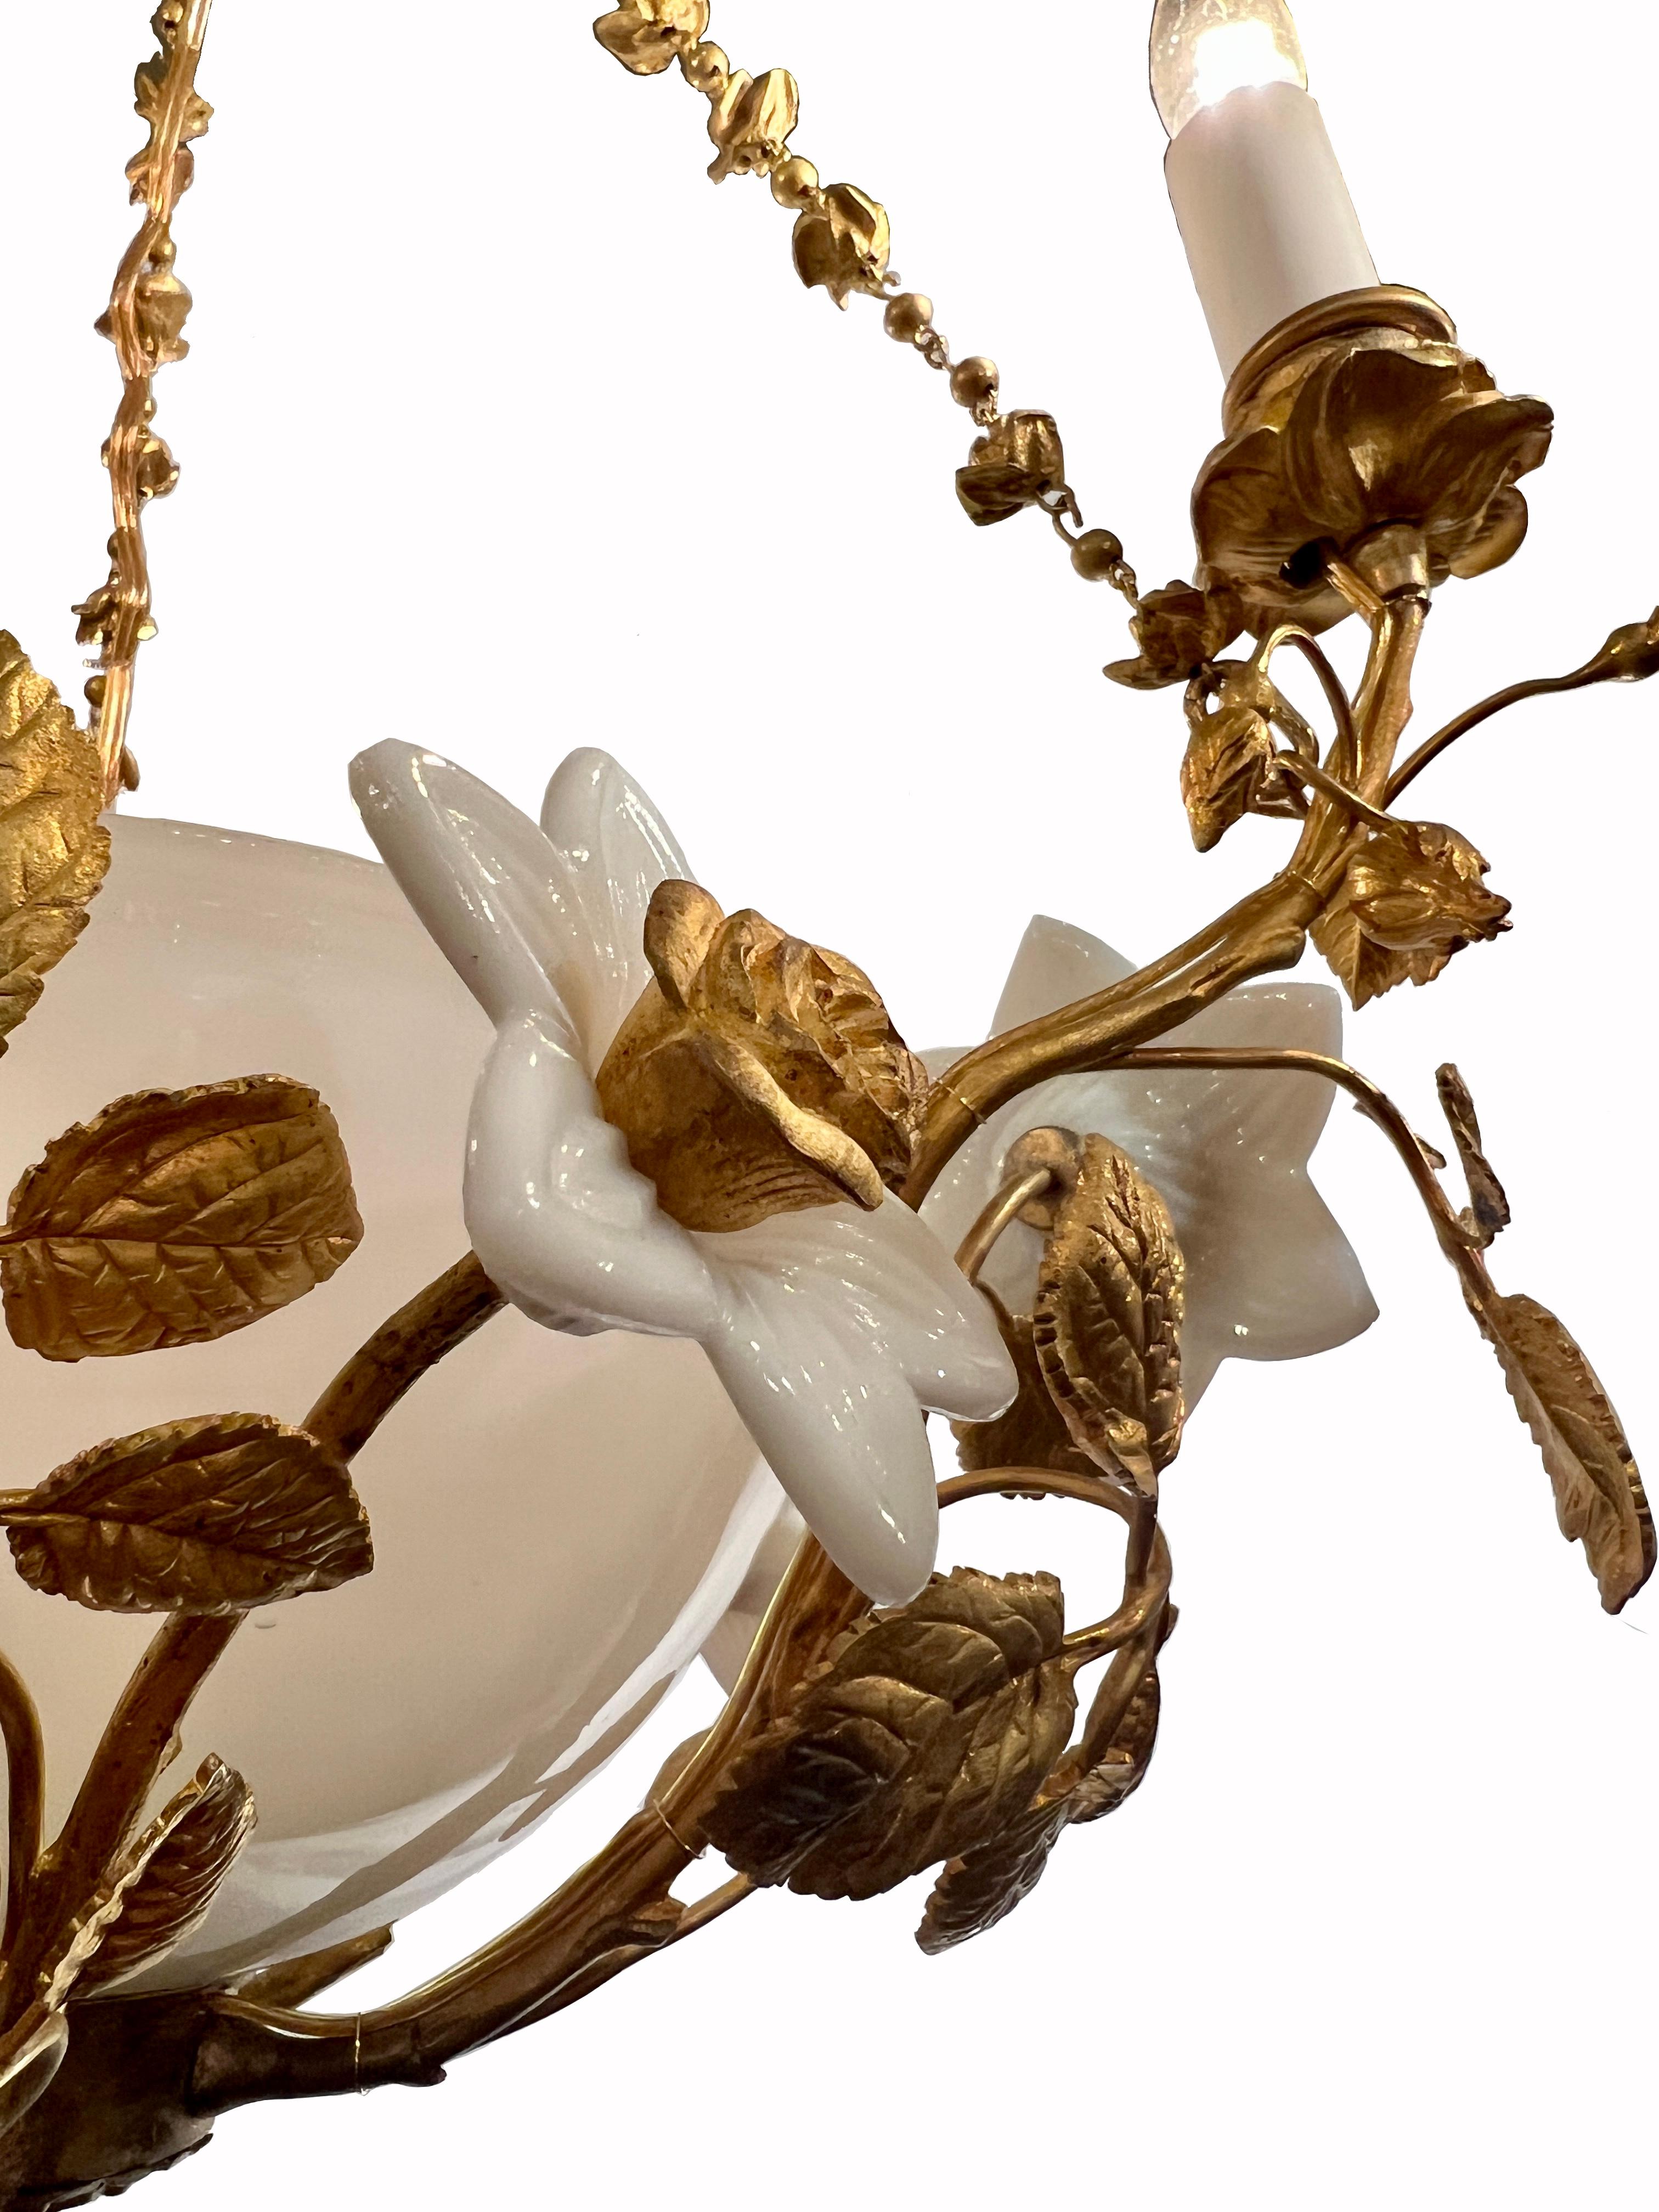 Antique French Charming Milk Glass 3 Light Chandelier with Gold Bronze Flowers, Circa 1900s.